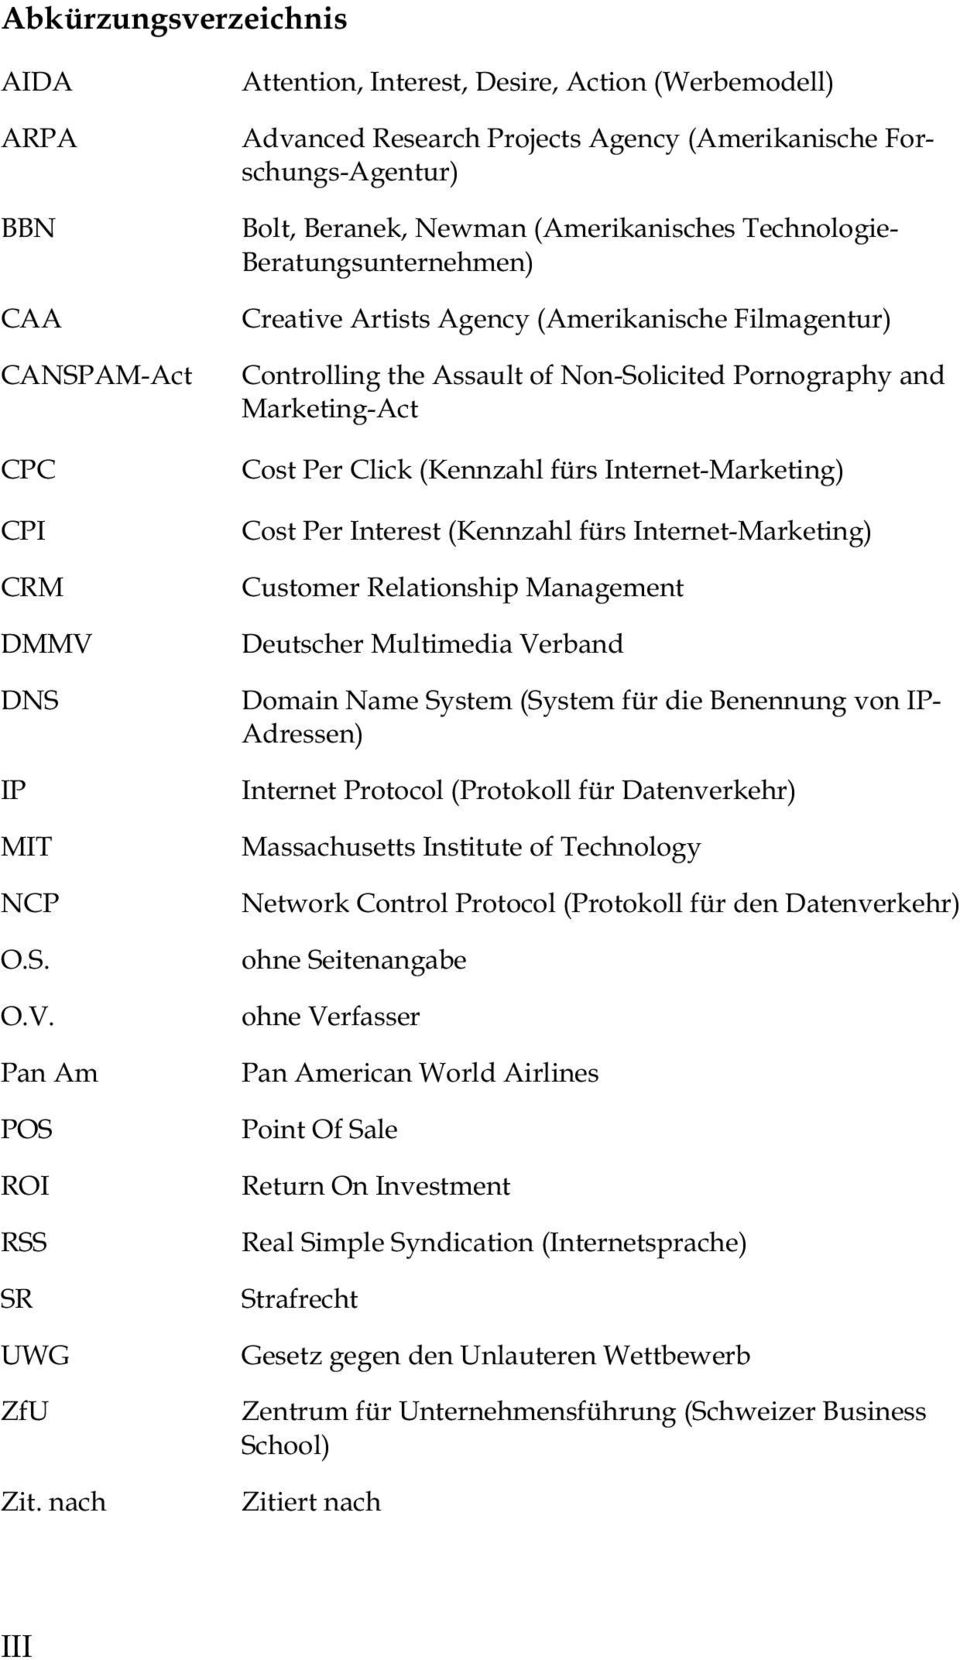 Creative Artists Agency (Amerikanische Filmagentur) Controlling the Assault of Non-Solicited Pornography and Marketing-Act Cost Per Click (Kennzahl fürs Internet-Marketing) Cost Per Interest